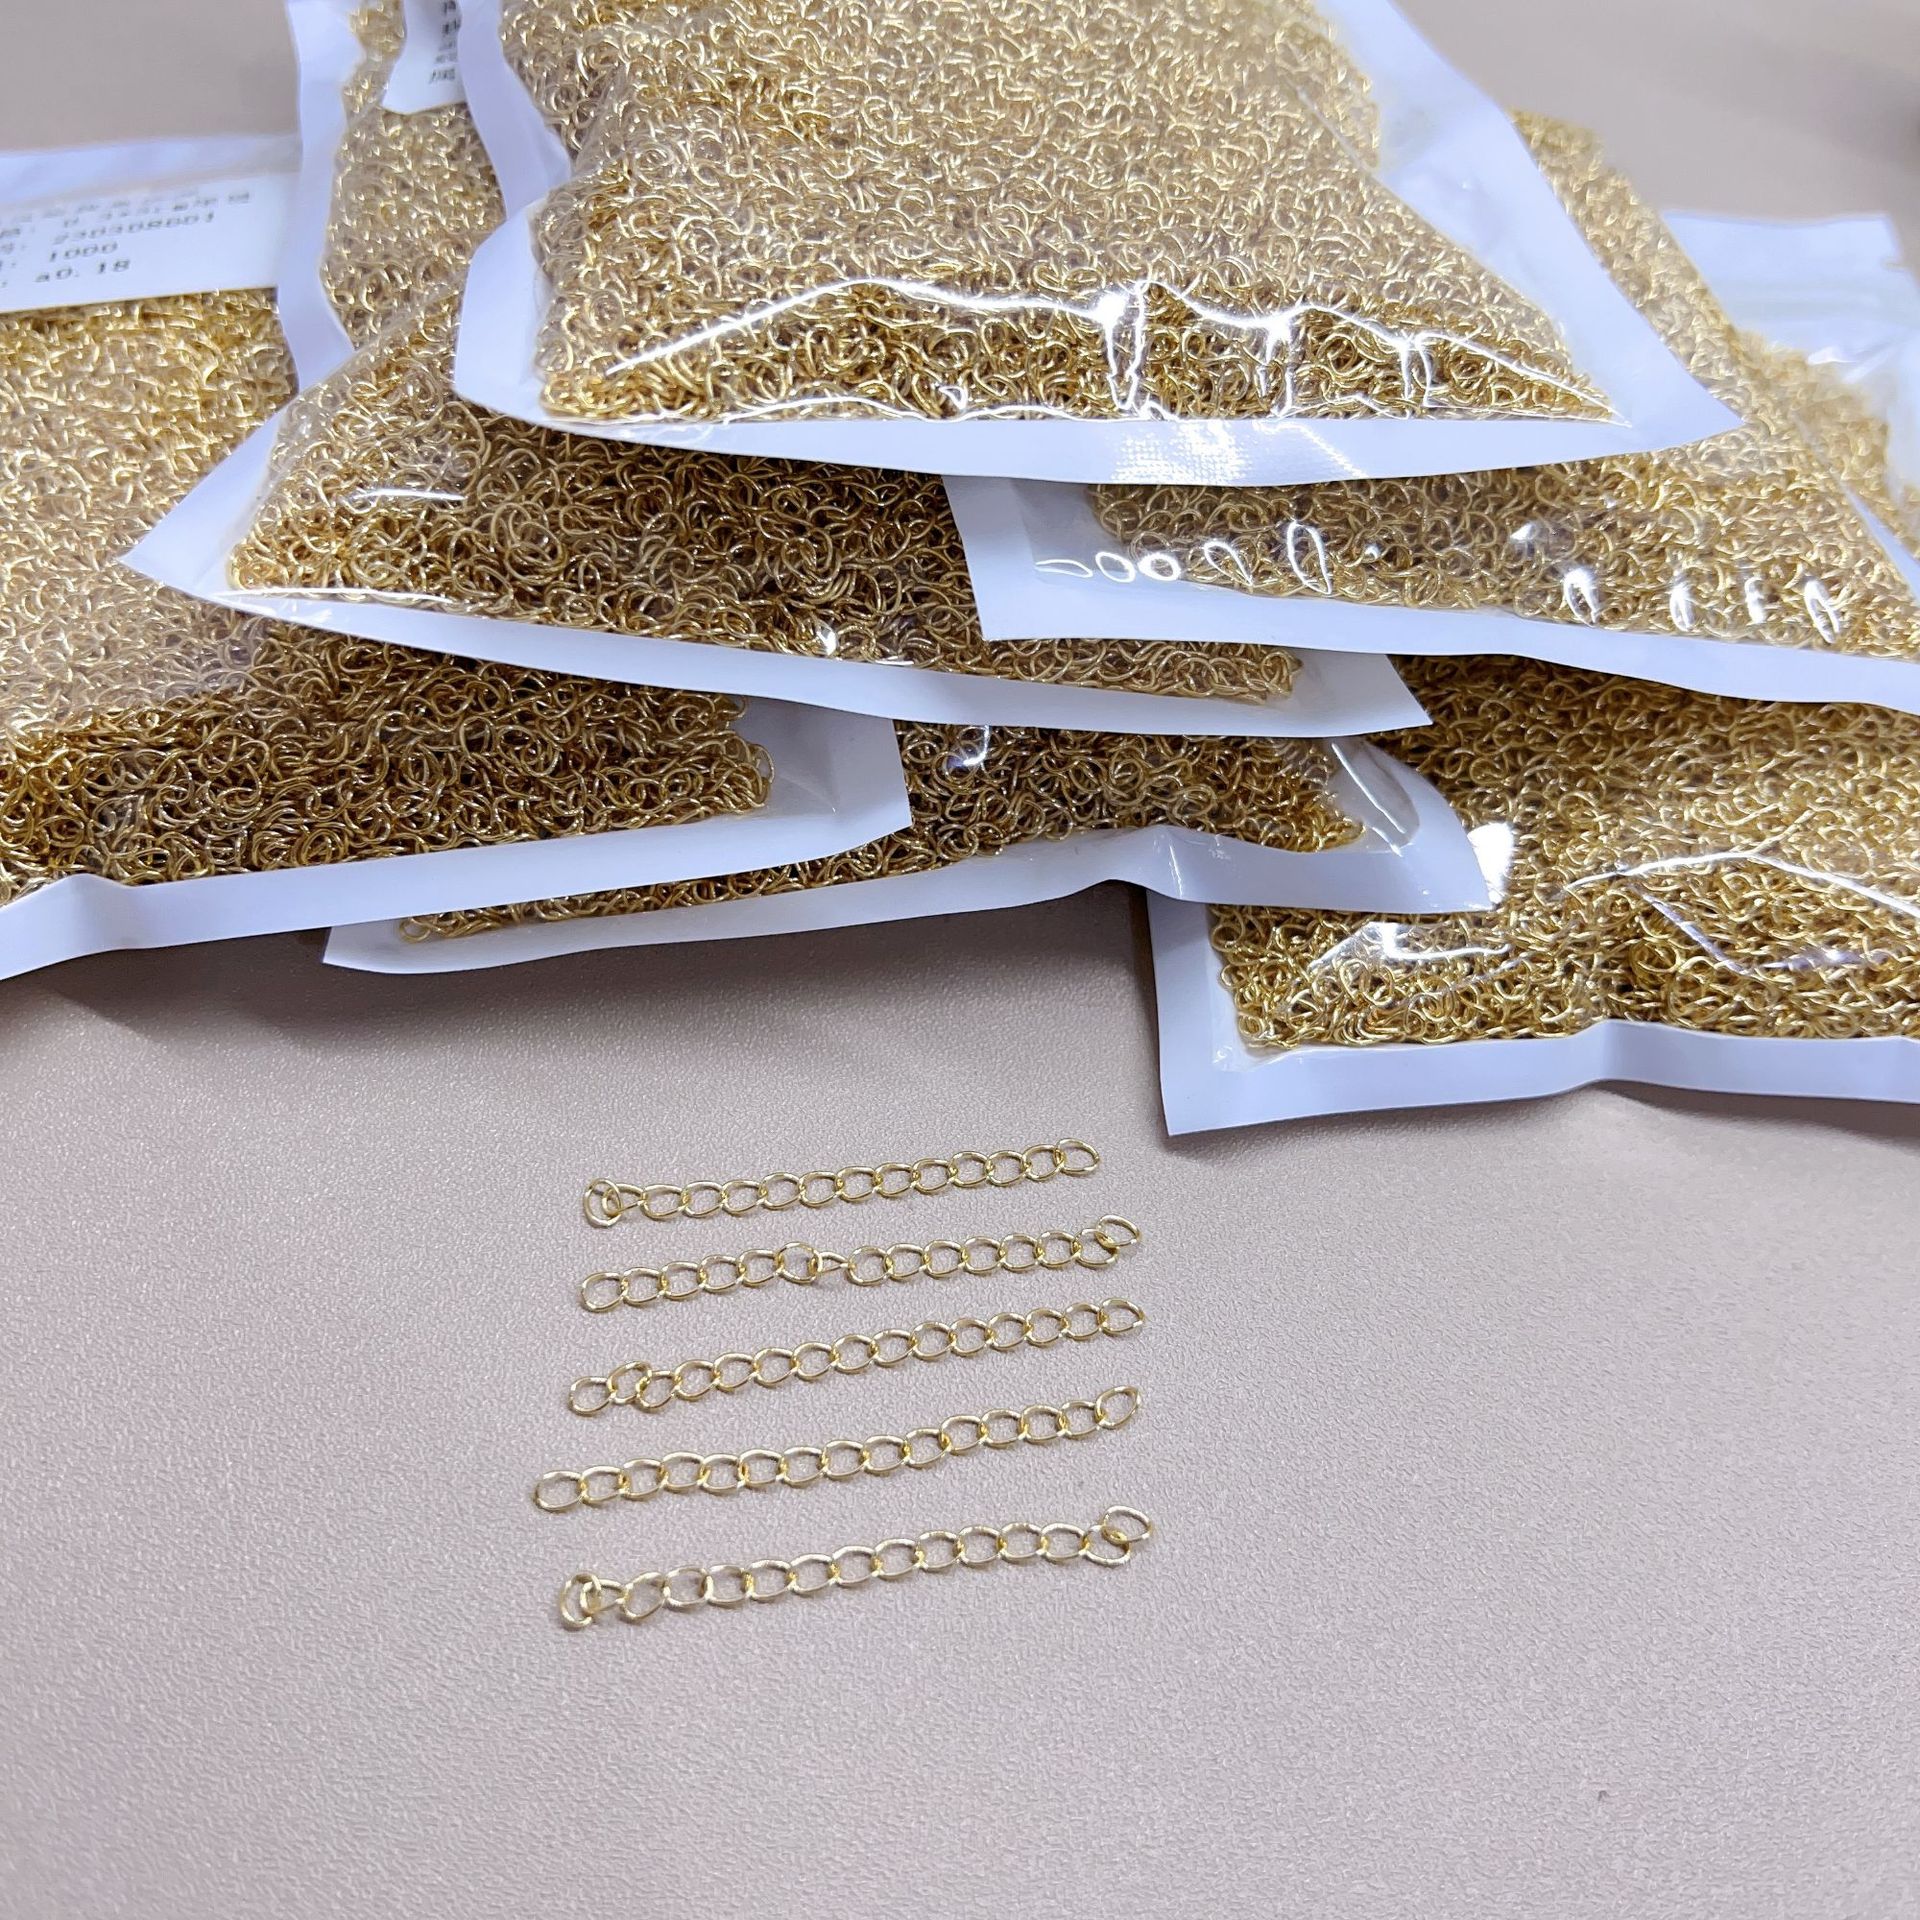 Diy Ornament Accessories Tail Chain 0.3 * 5cm Conventional Tail Chain Real Gold Plating Ornament Accessories Material Packaging